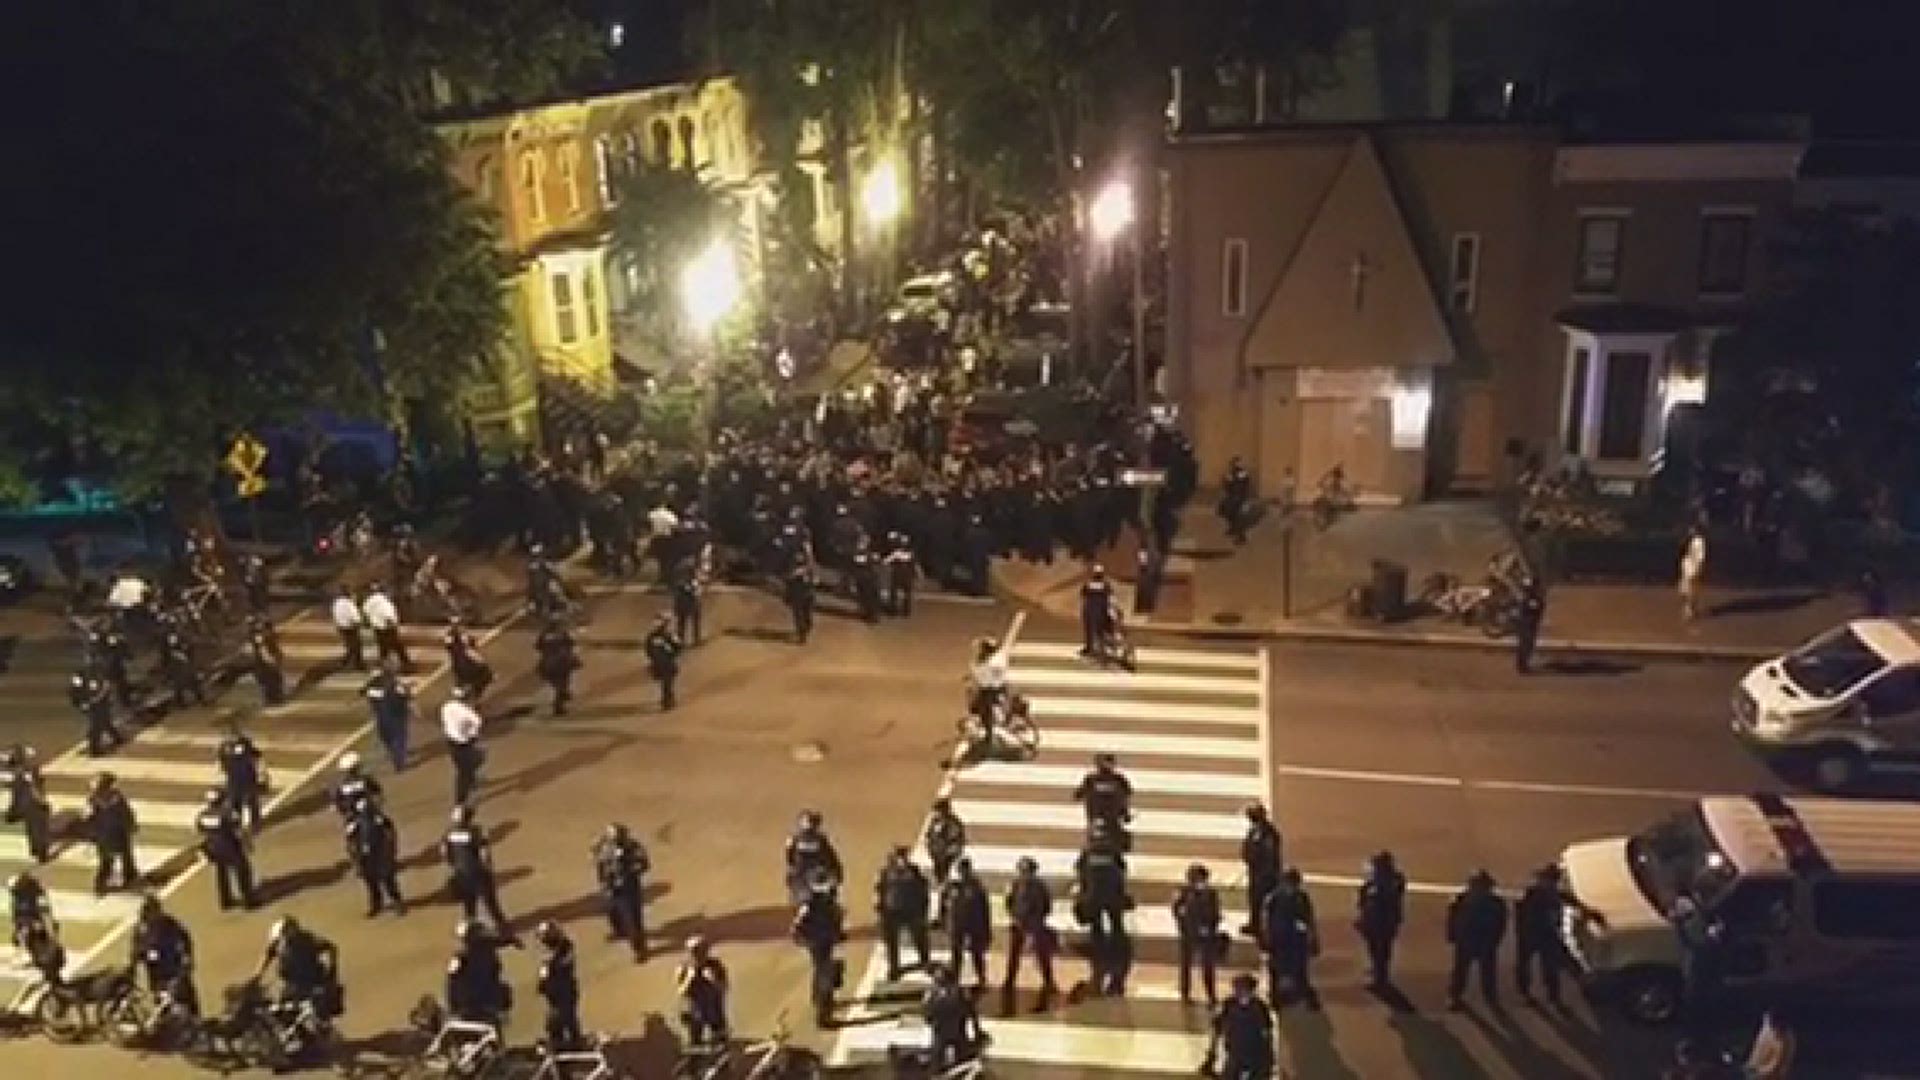 Dozens of arrests were made after police surrounded protesters on Swann Street in DC on June 1. Video provided by Julian Hunt & Lucrecia Laudi, DC architects